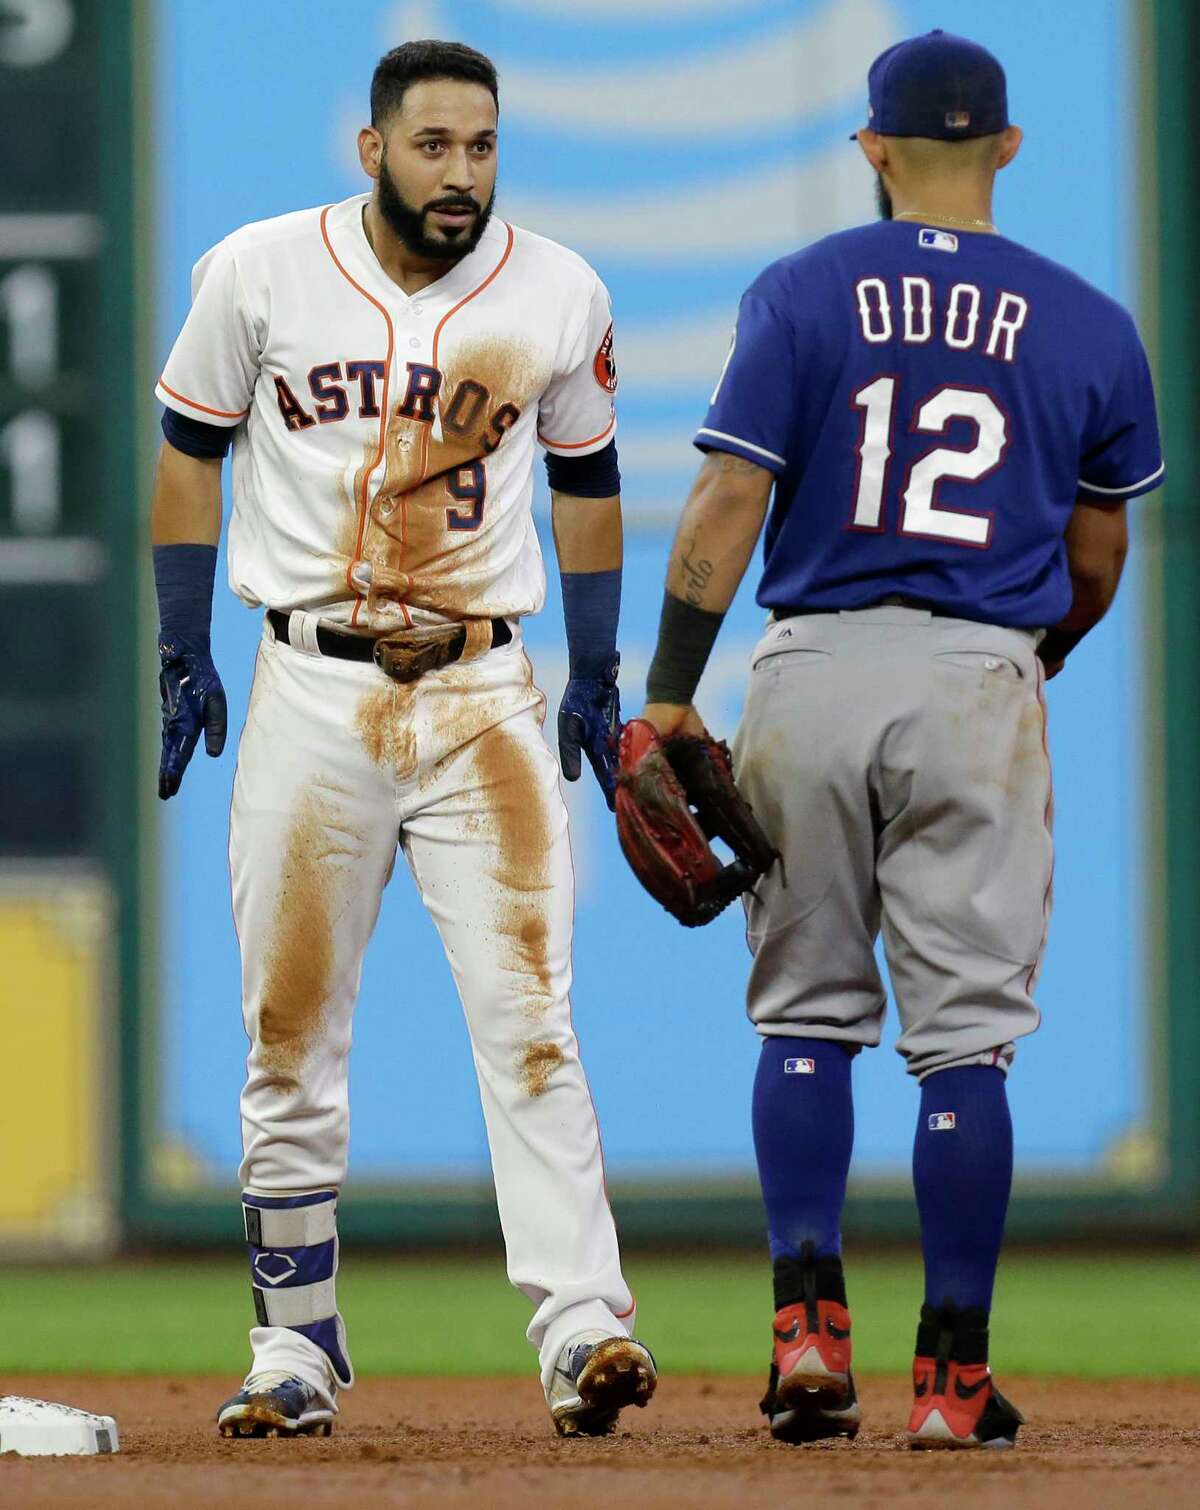 Houston Astros Marwin Gonzalez talks to Texas Rangers Rougned Odor as he dusts himself off after hitting a double during the second inning at Minute Maid Park Wednesday, May 3, 2017, in Houston.